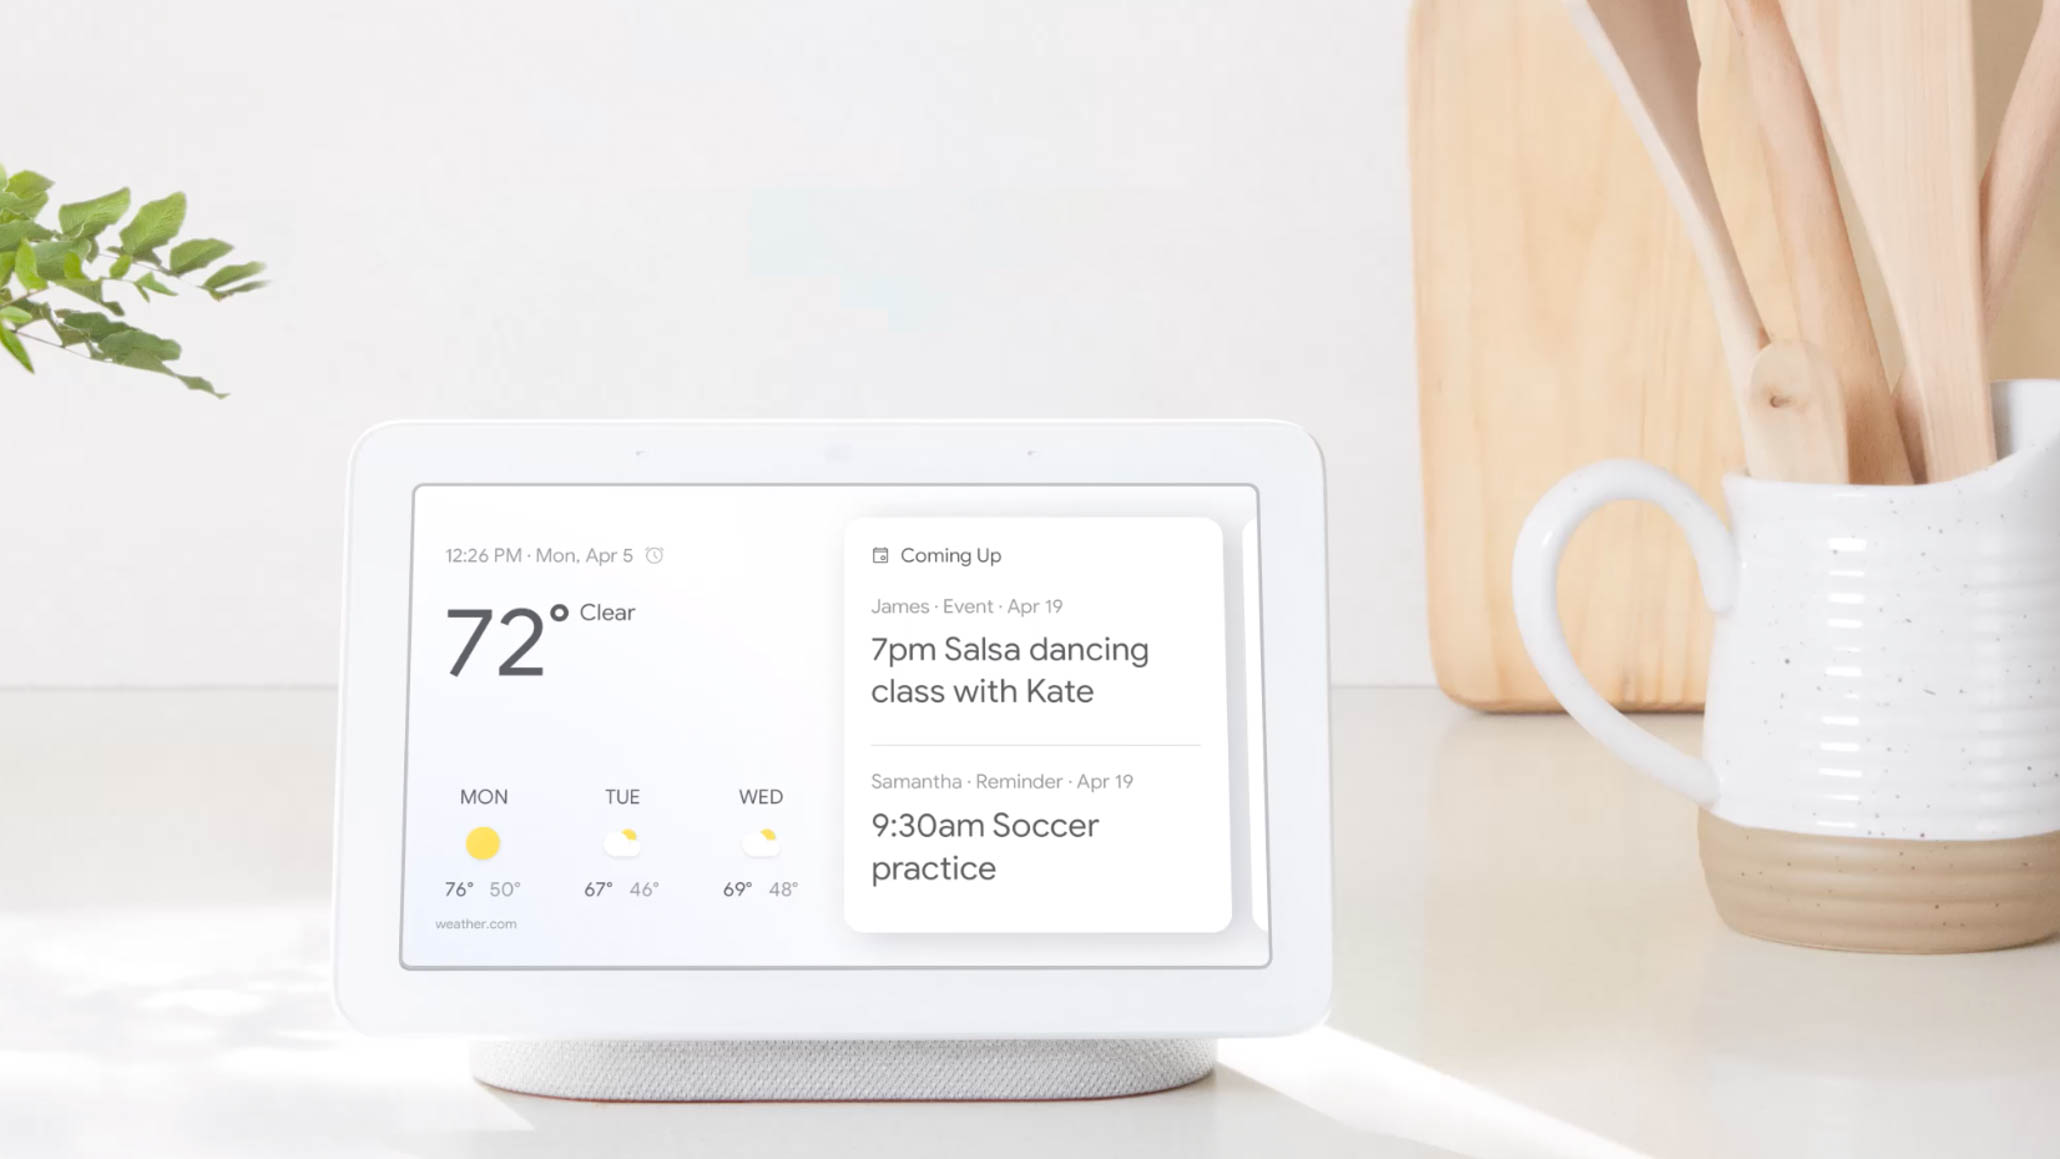 Smaller than similar Facebook and Amazon displays, Google Home Hub enables access to all core Google services through Google Assistant. Image: Google.